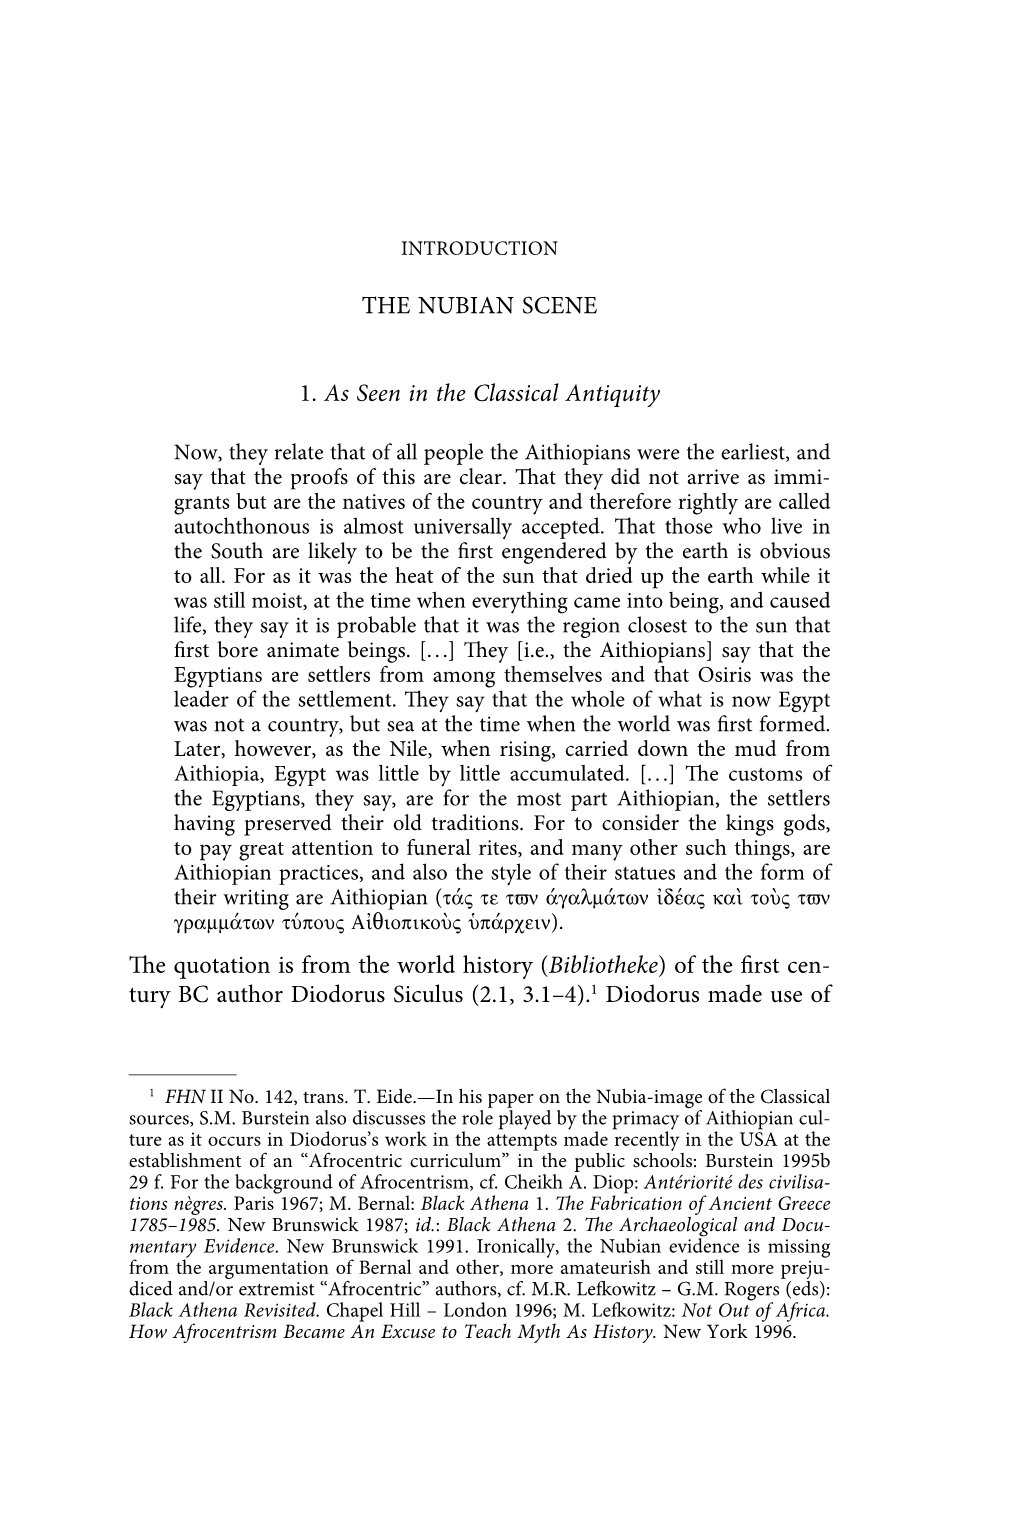 THE NUBIAN SCENE 1. As Seen in the Classical Antiquity The